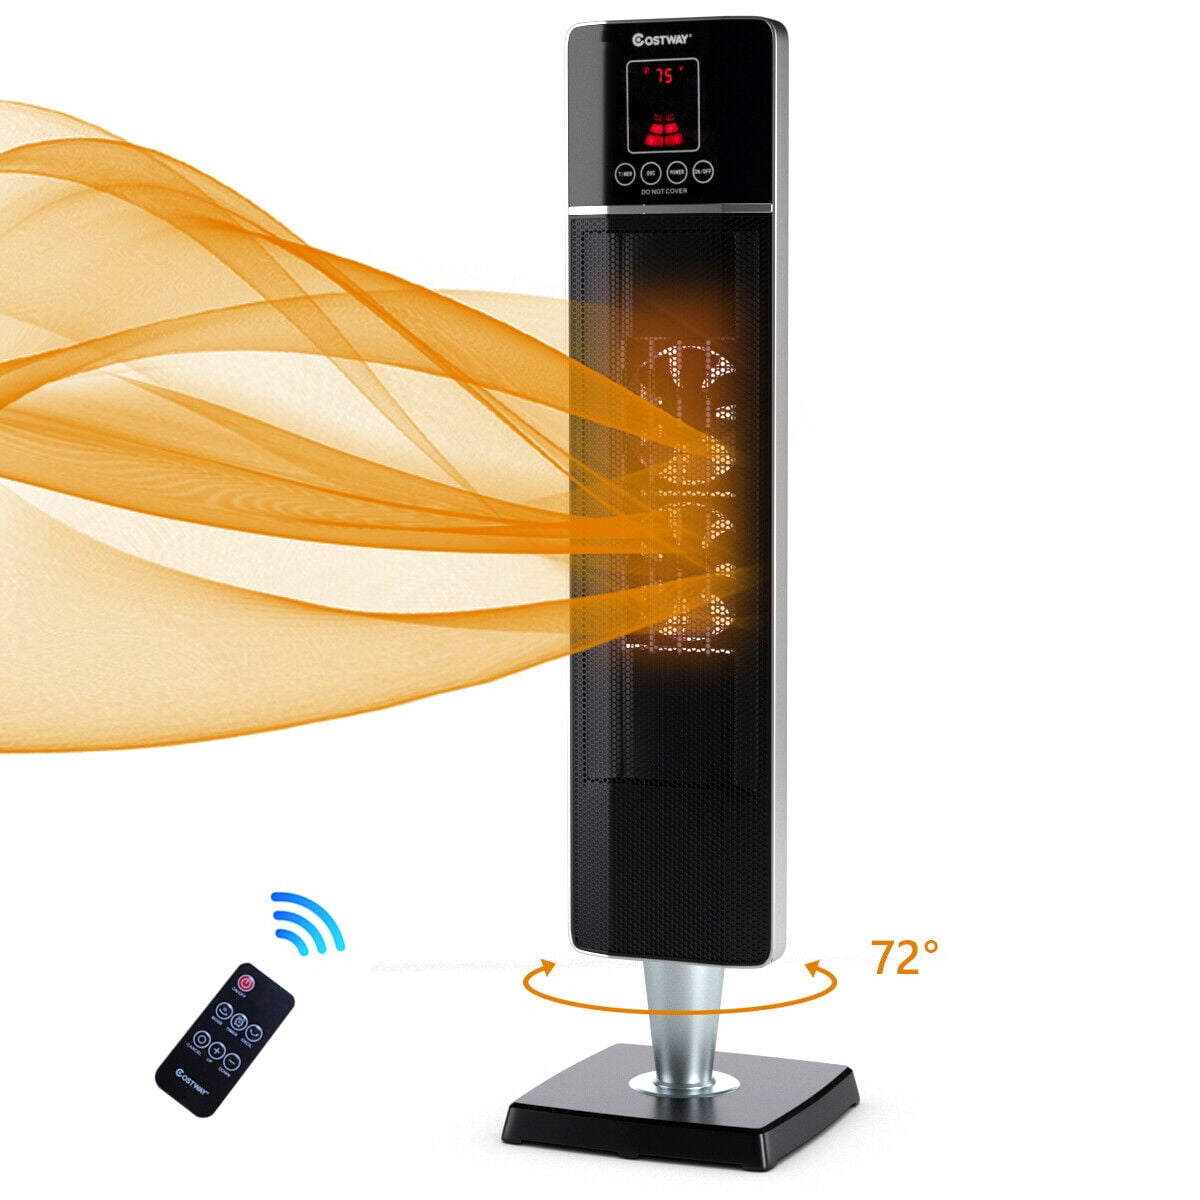 Costway 1500W Portable Oscillating Ceramic Tower Heater w/ Timer Remote  Control Room Use